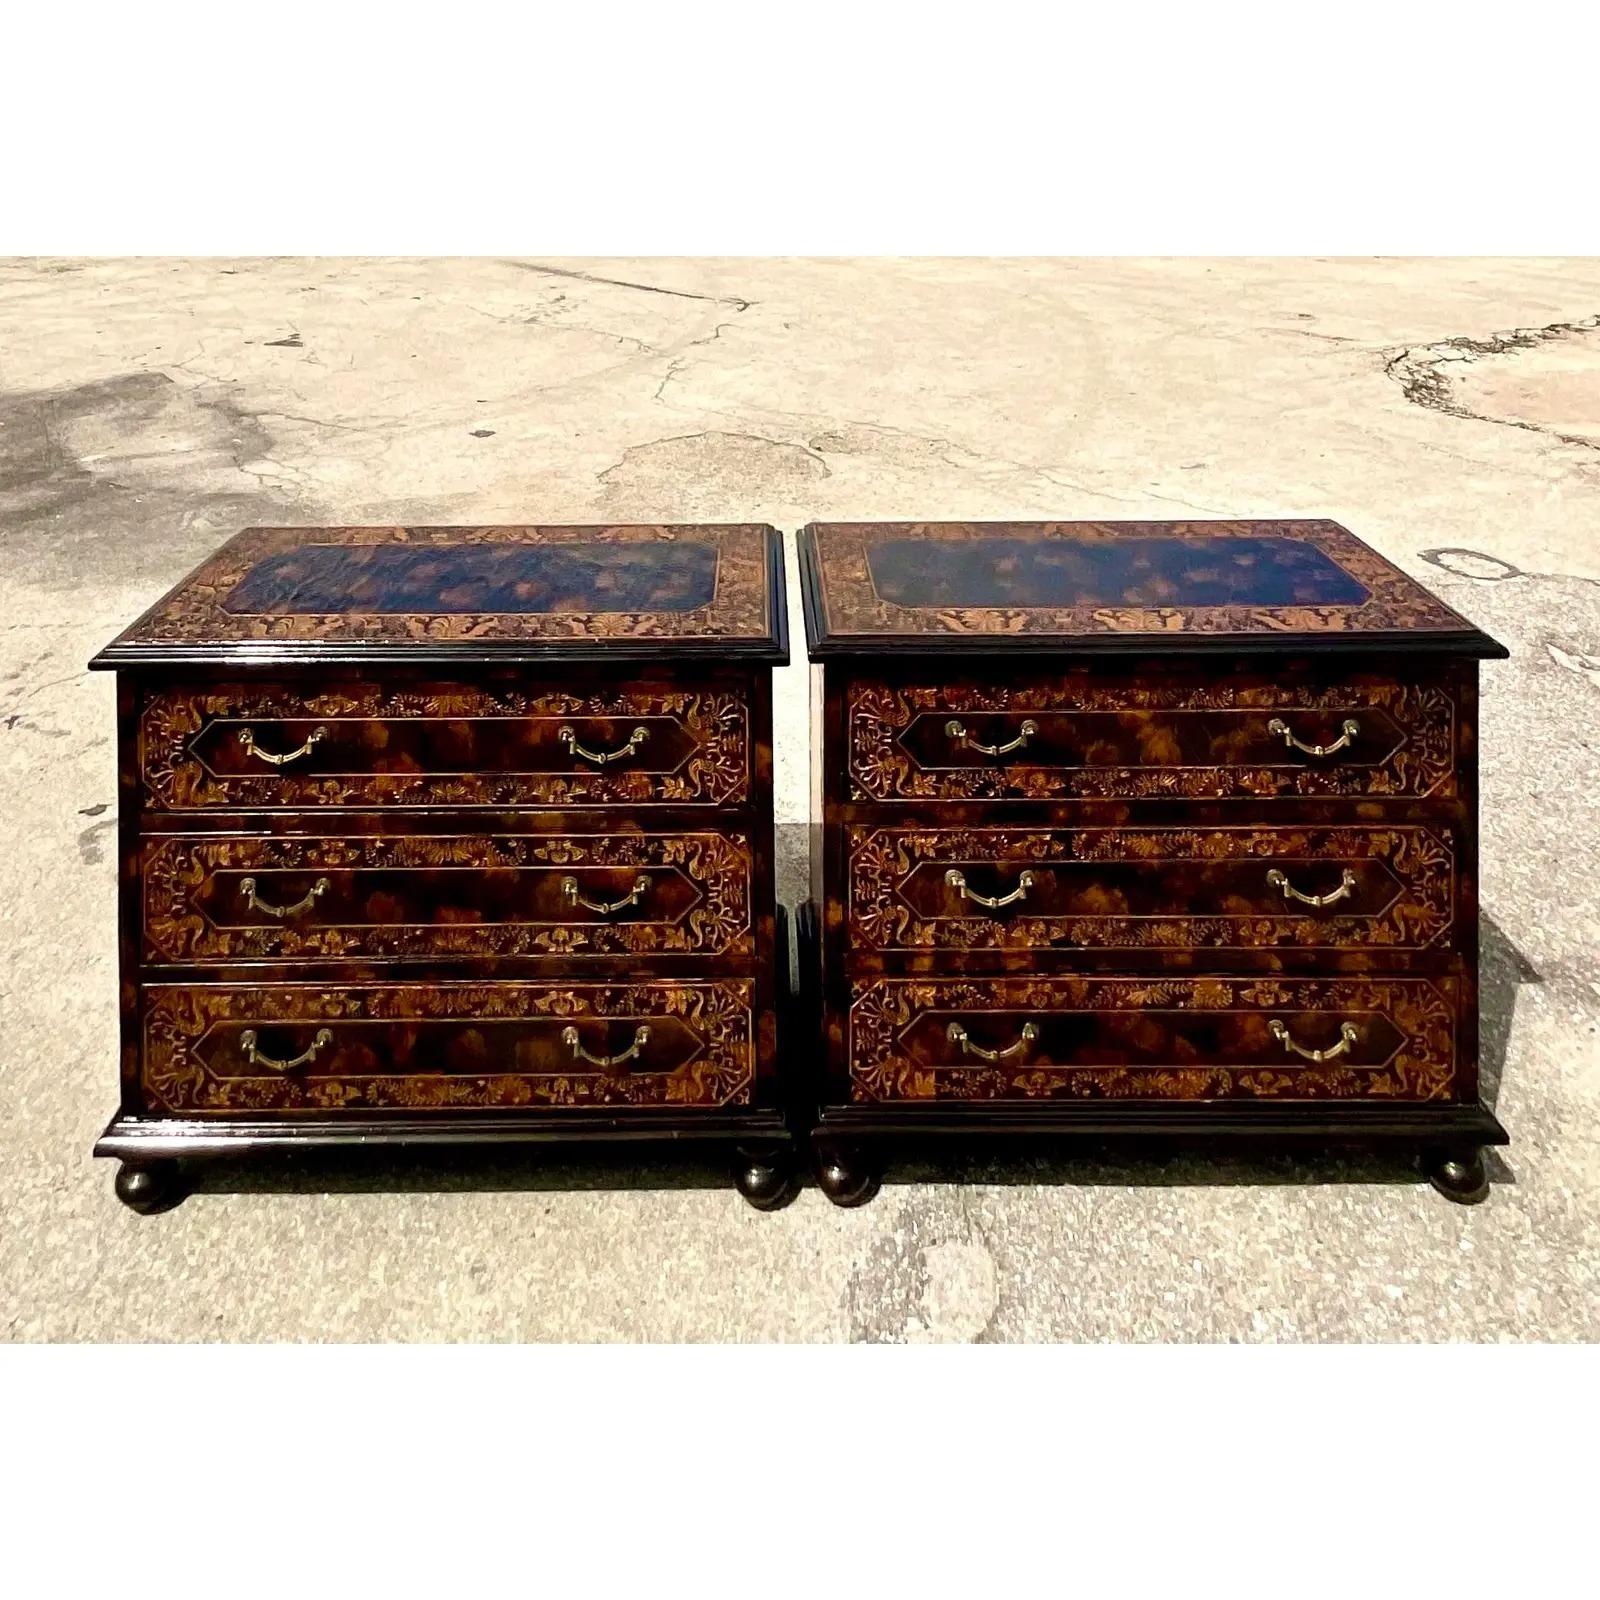 Fantastic pair of vintage Regency chests. Made by the iconic Sarreid group. Hand carved detail with a chic tortoise shell finish. Perfect as chests or even great as larger nightstands. Acquired from a Palm Beach estate.